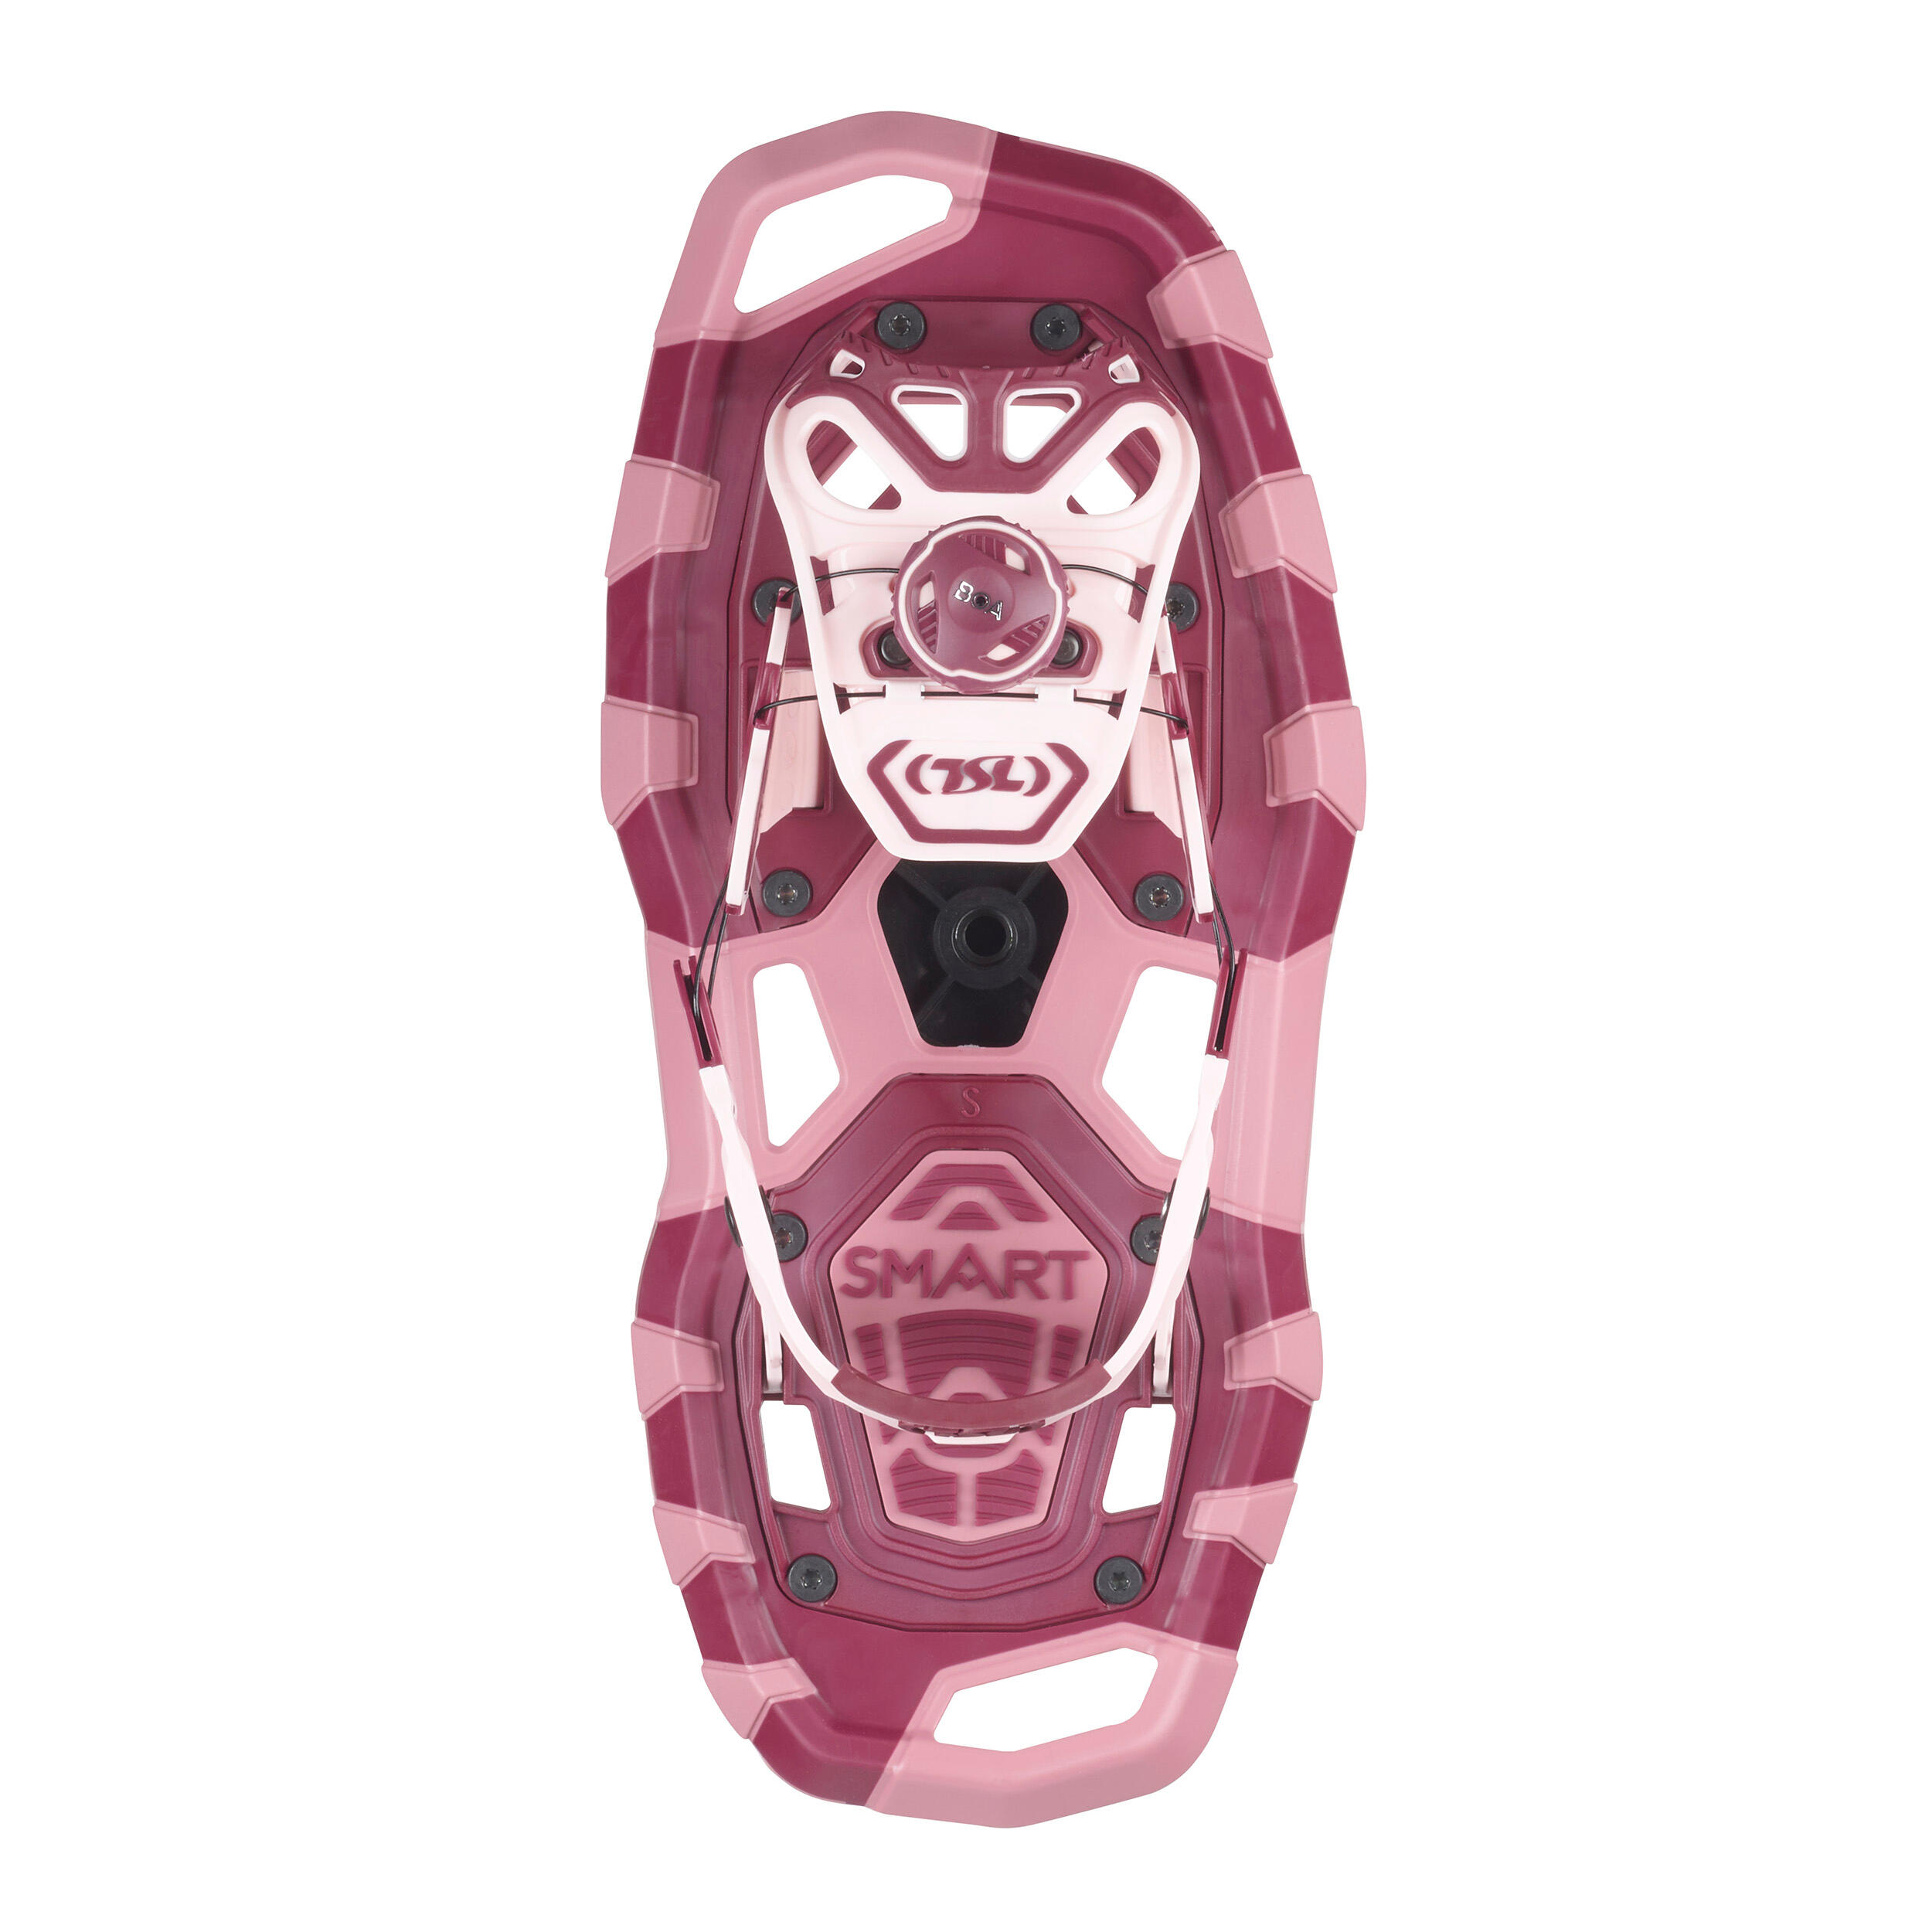 Small Deck Snowshoes - TSL SMART Pink - 1/8